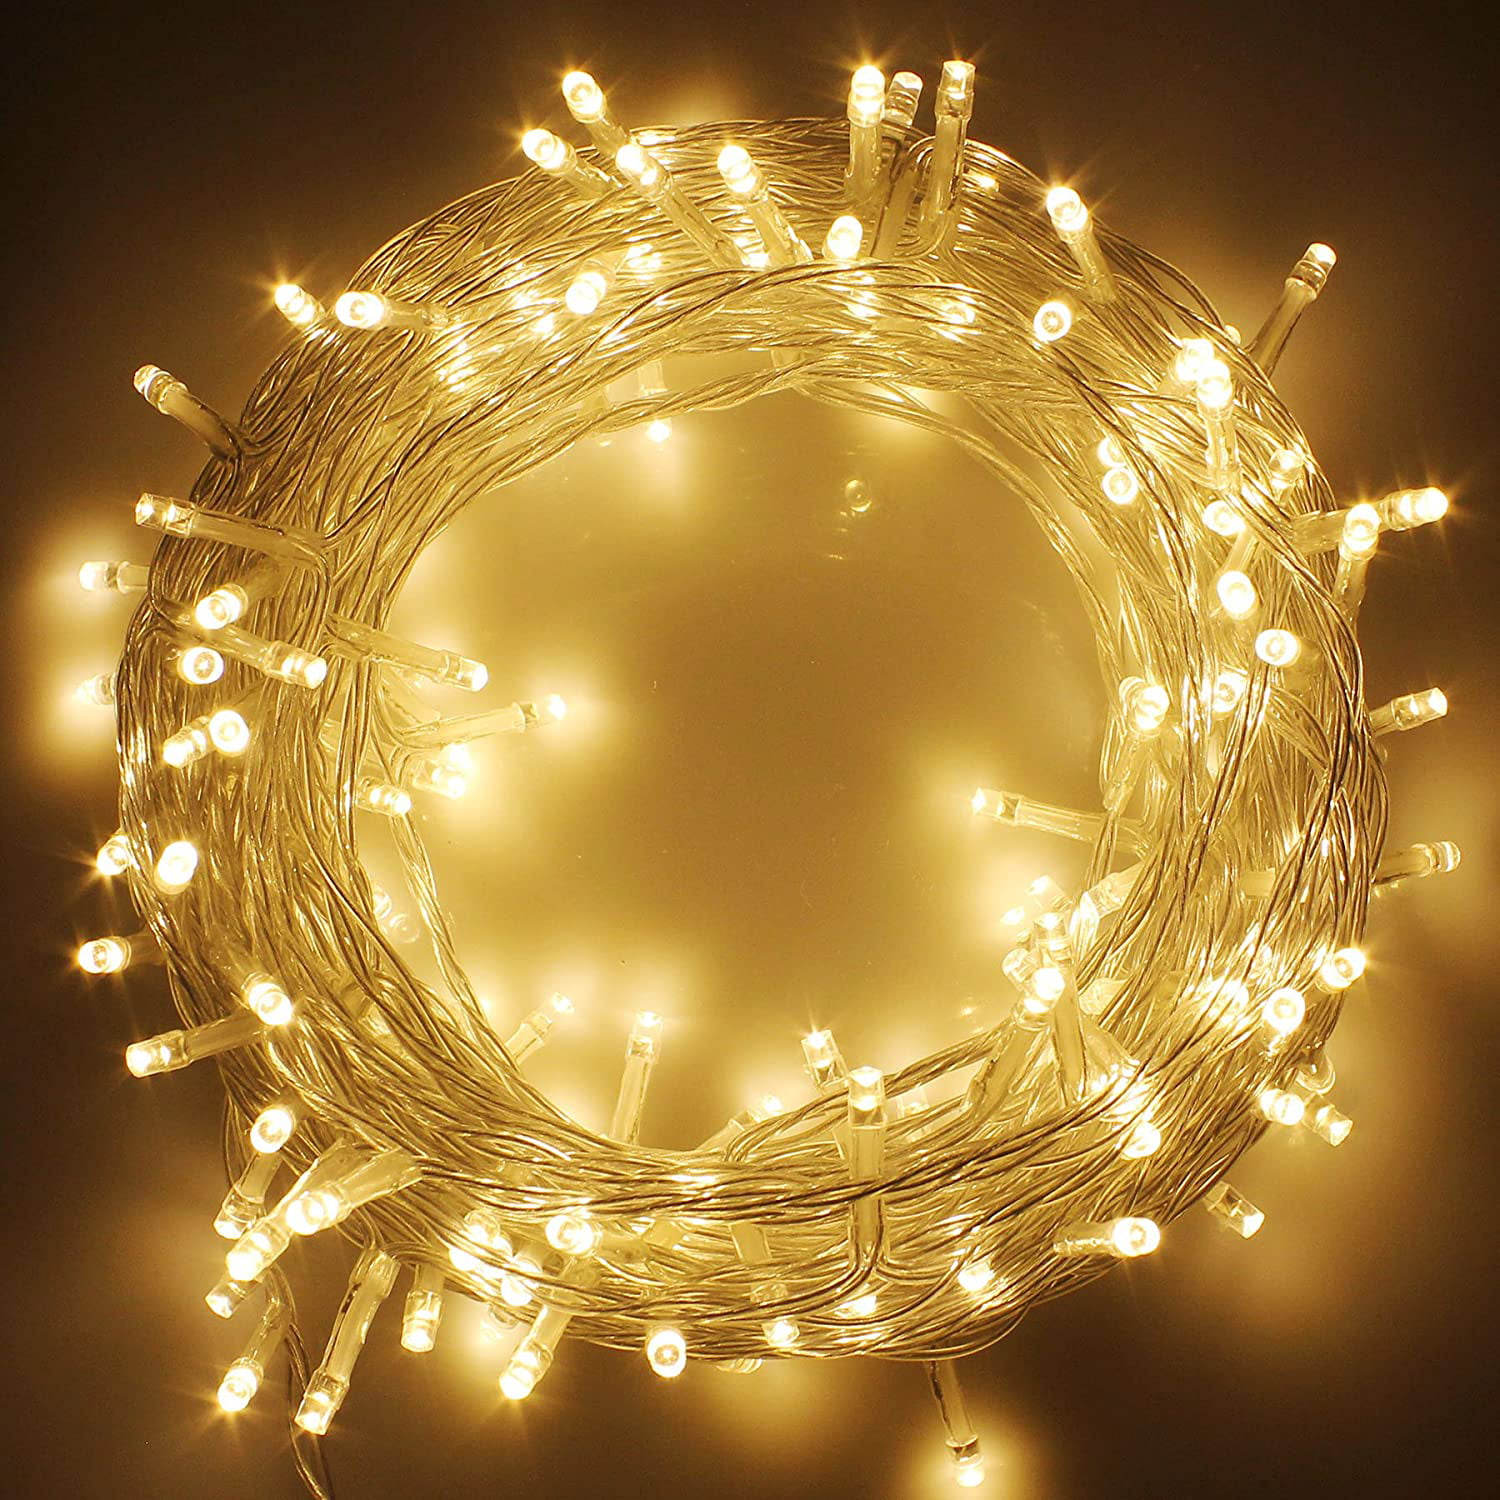 100-1000 LED Fairy String Lights Waterproof for Christmas Tree Garden Outdoor US 